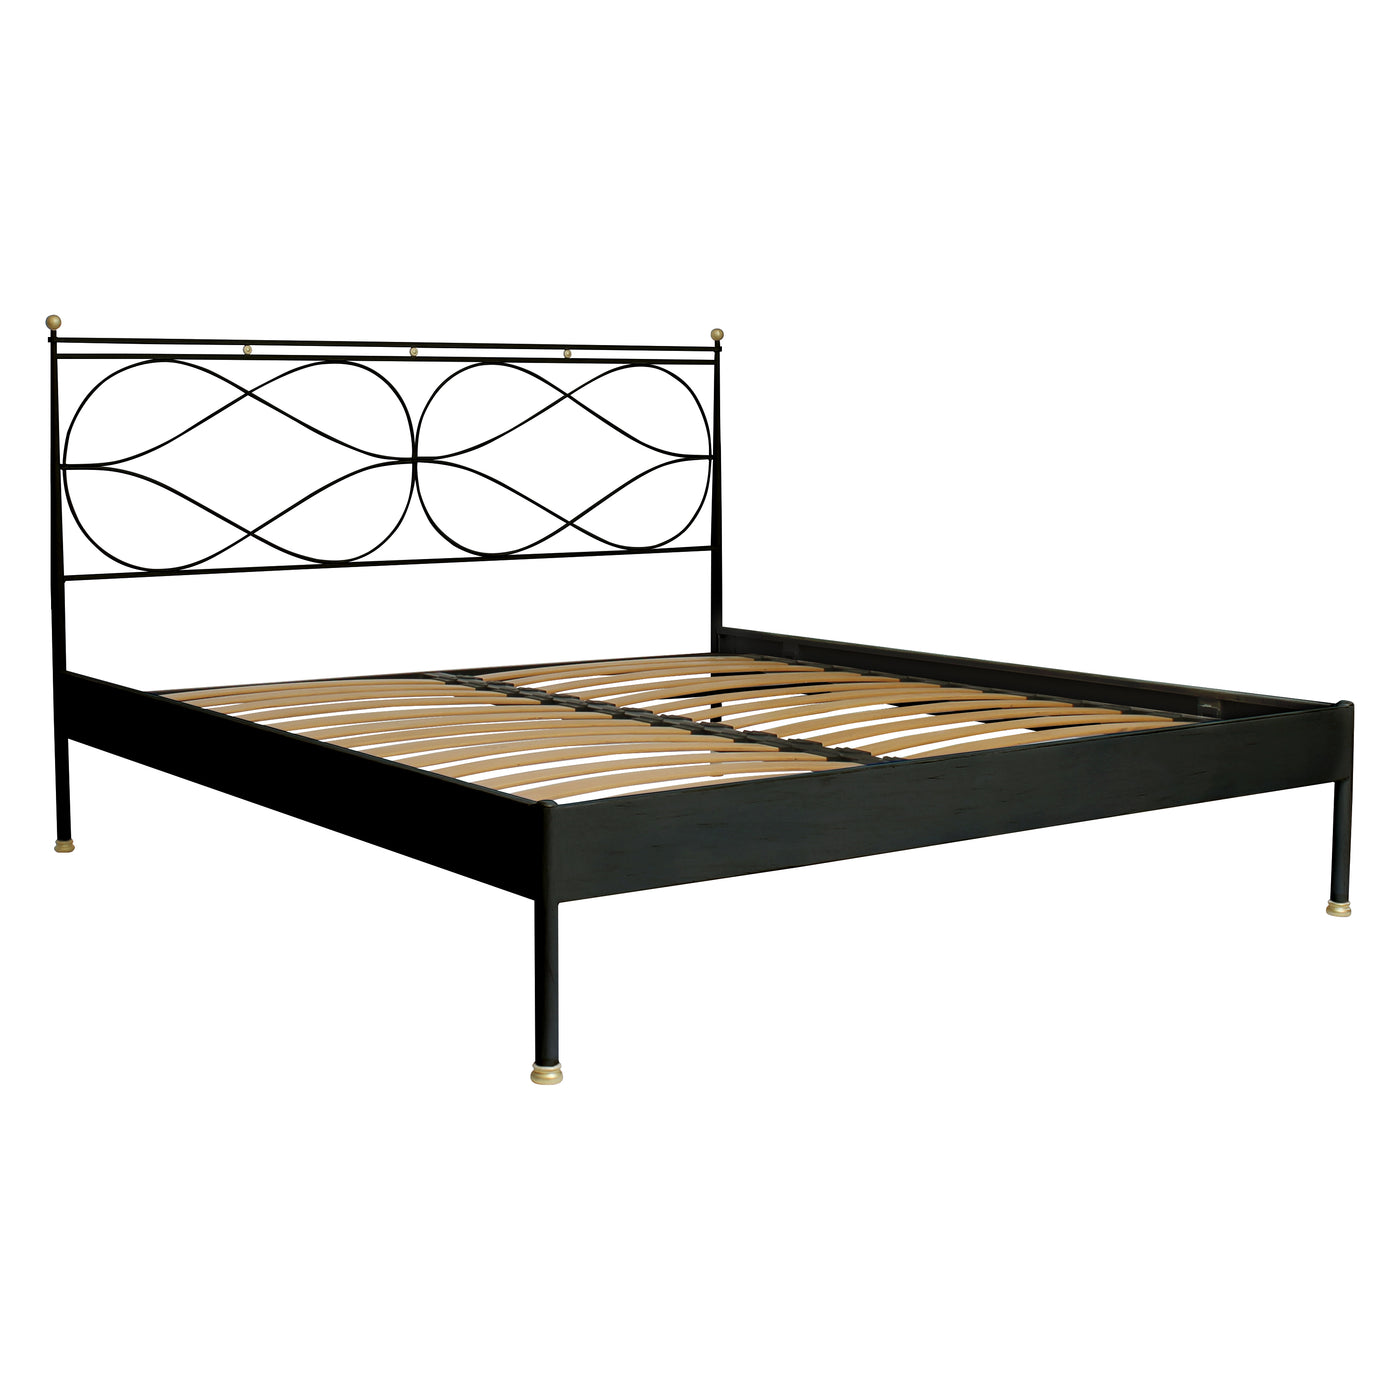 A contemporary metal king sized bed painted in black and hints of gold